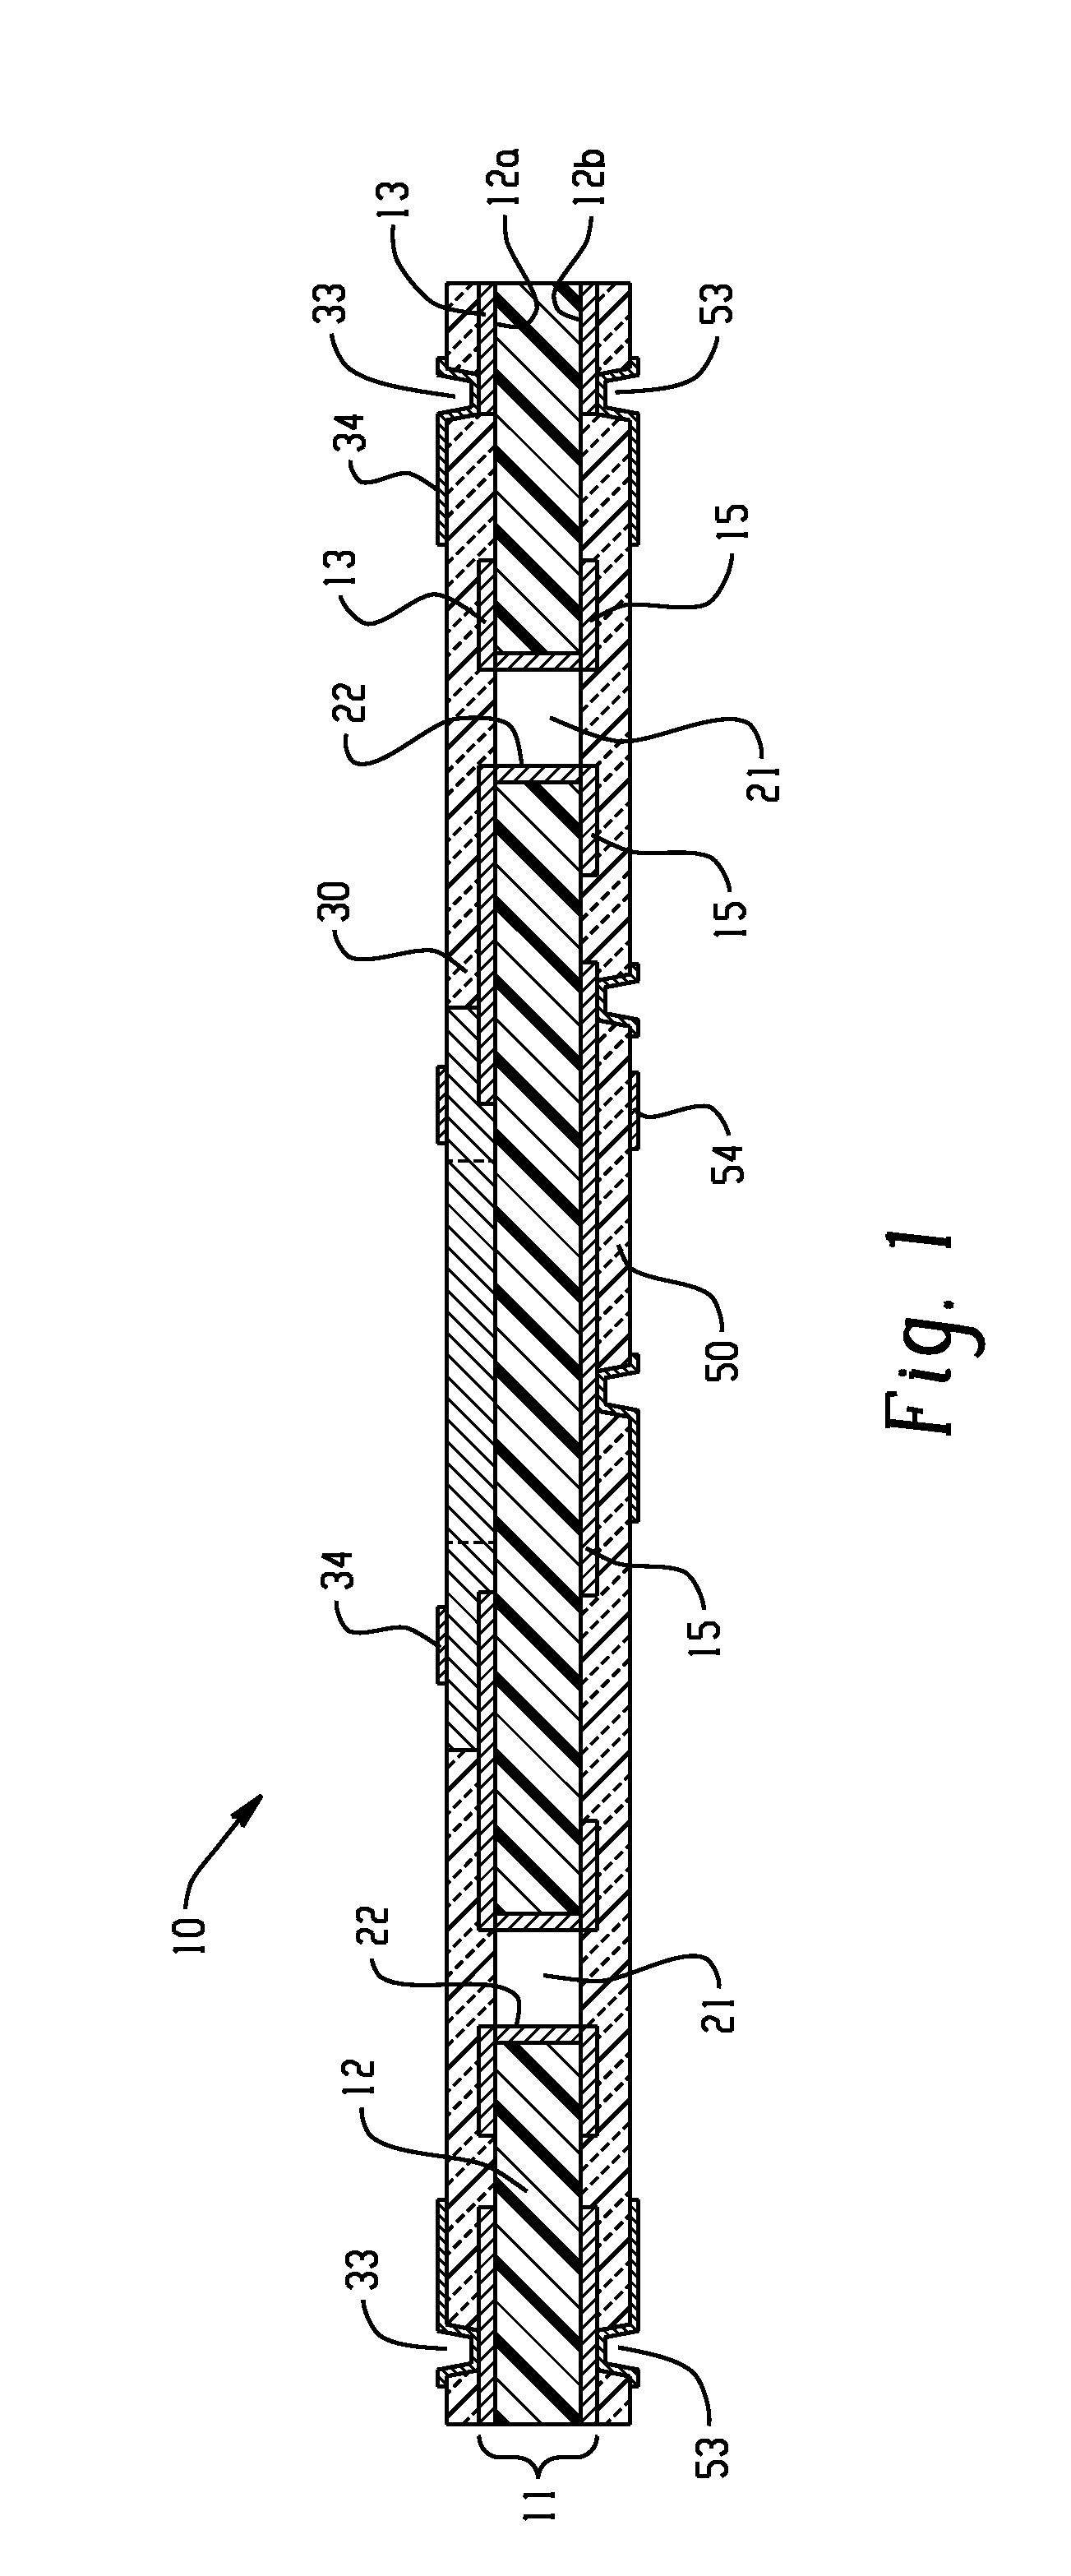 Dielectric materials, methods of forming subassemblies therefrom, and the subassemblies formed therewith